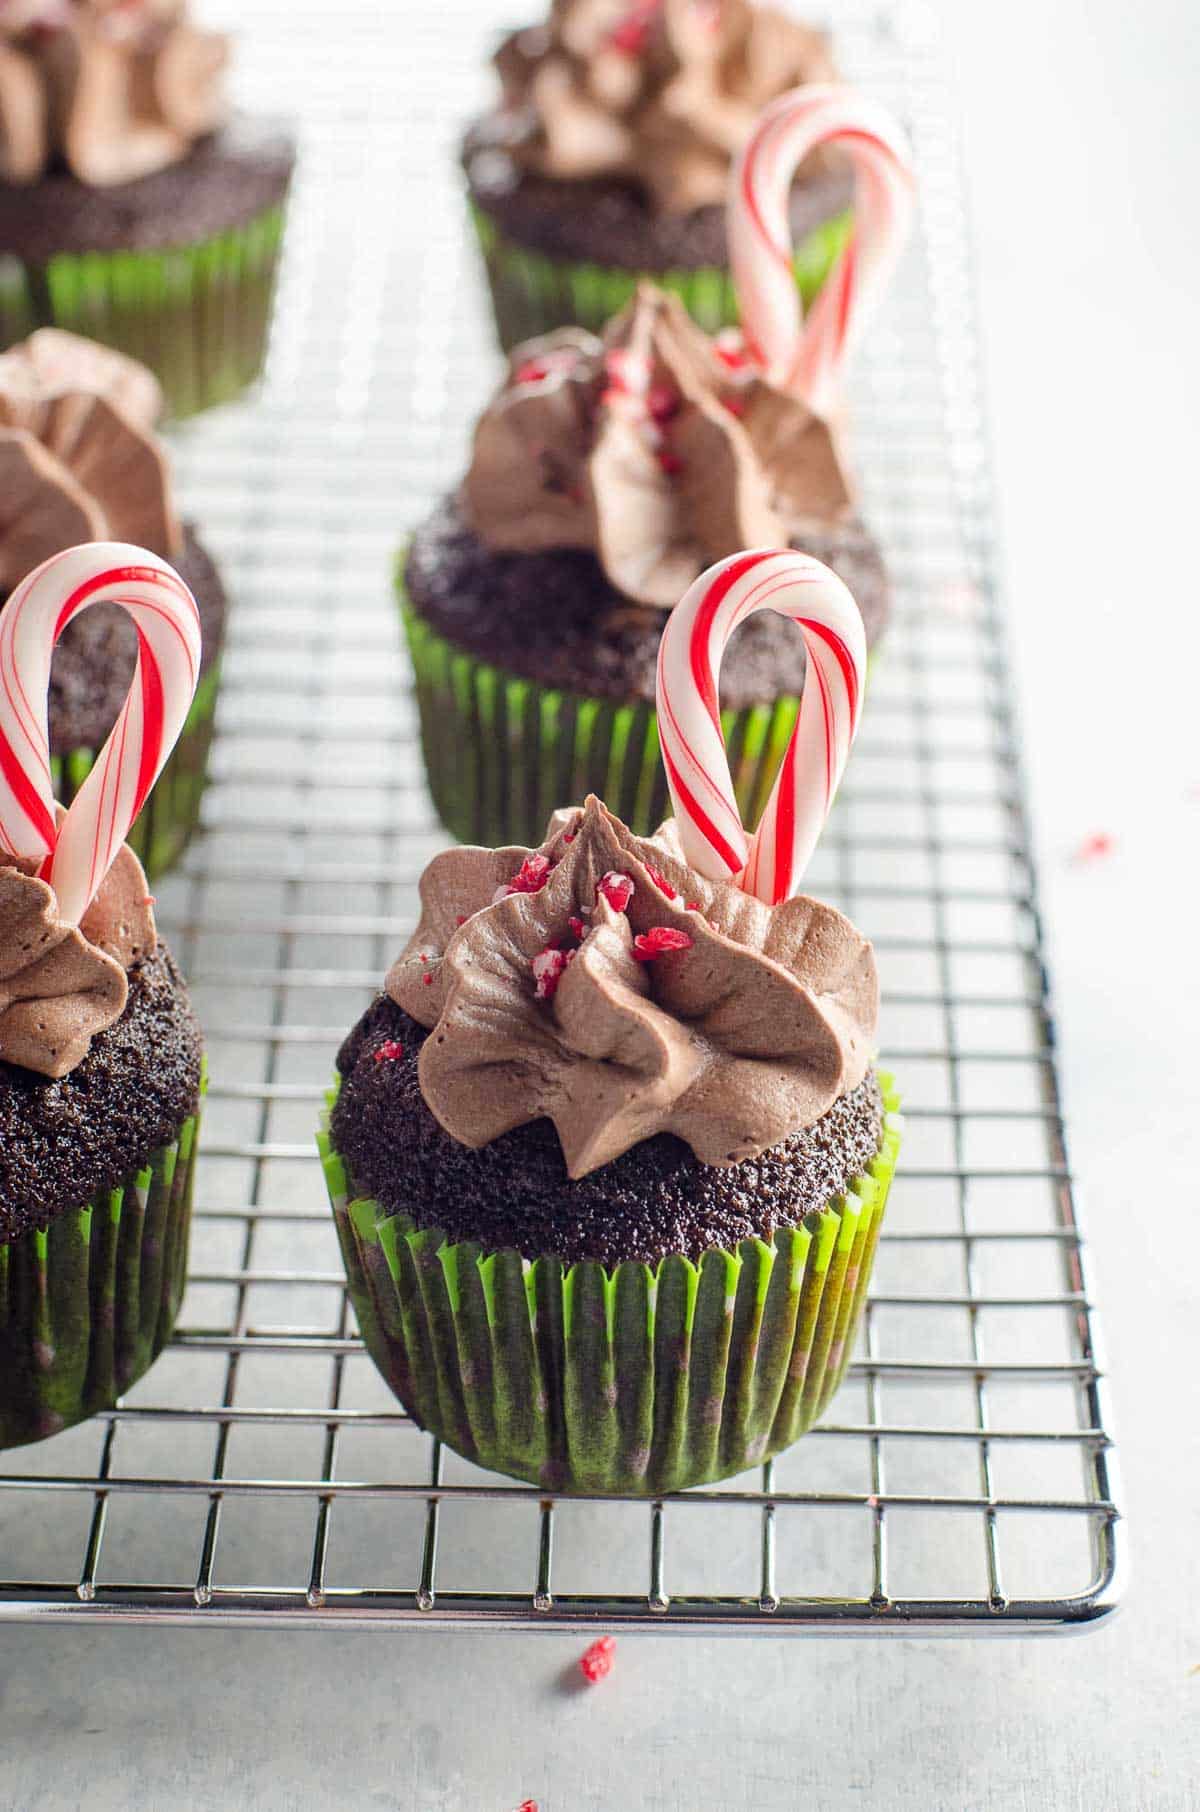 chocolate candy cane cupcakes on a baking rack